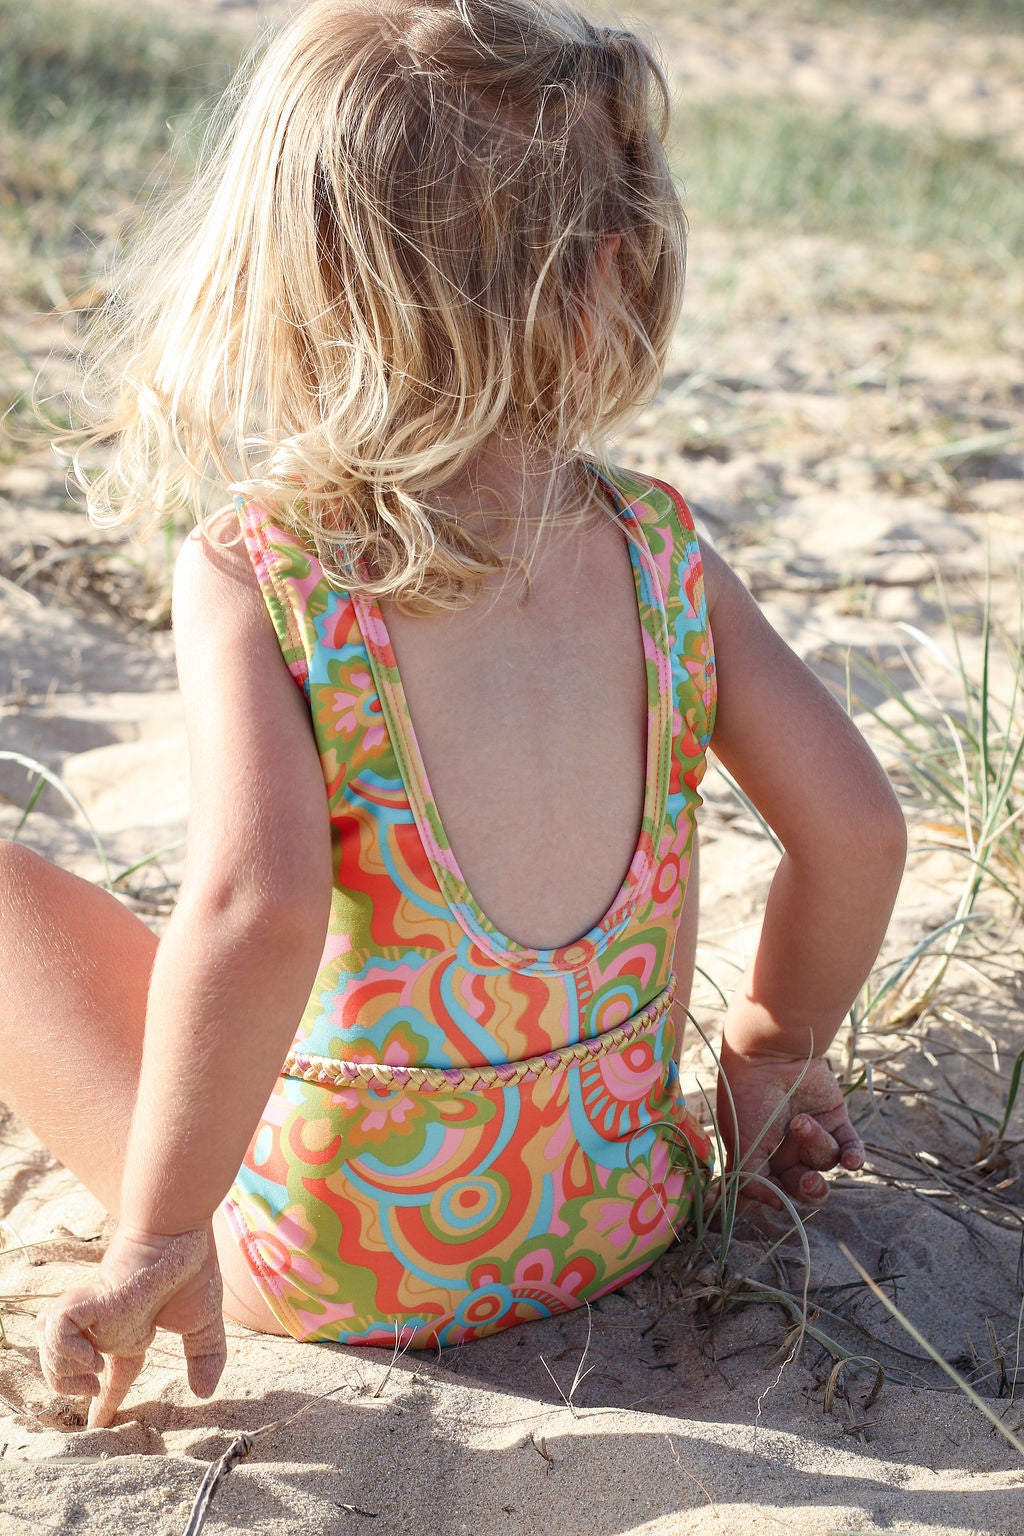 Girls One Piece Swimsuit - Retro Print - Lilly - Lifestyle 3